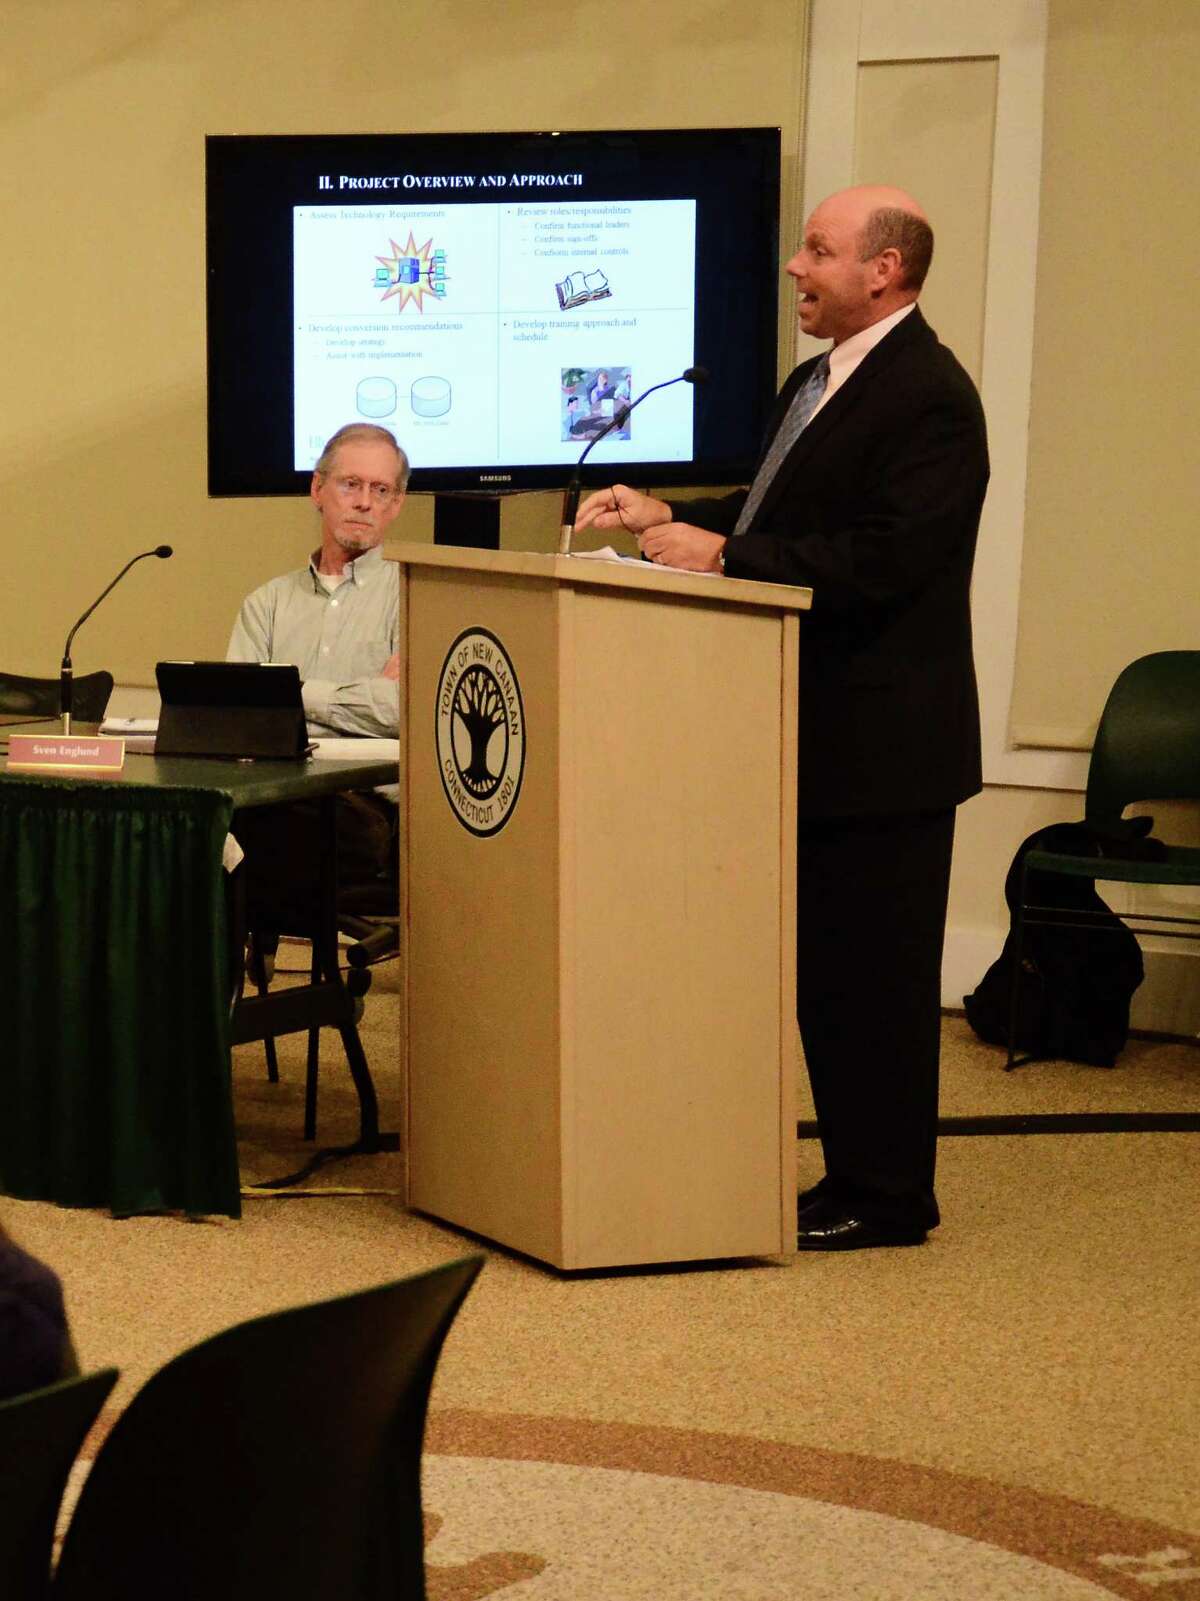 Jeffrey Ziplow, a partner with Blum Shapiro and consultant for the Town of New Canaan, Conn., speaks about Munis, a financial accounting system that will replace the current one used by the town, during a Town Council meeting Wednesday, Sept. 17, 2014, at the New Canaan Nature Center. Pictured on the left, Councilman Sven Englund.